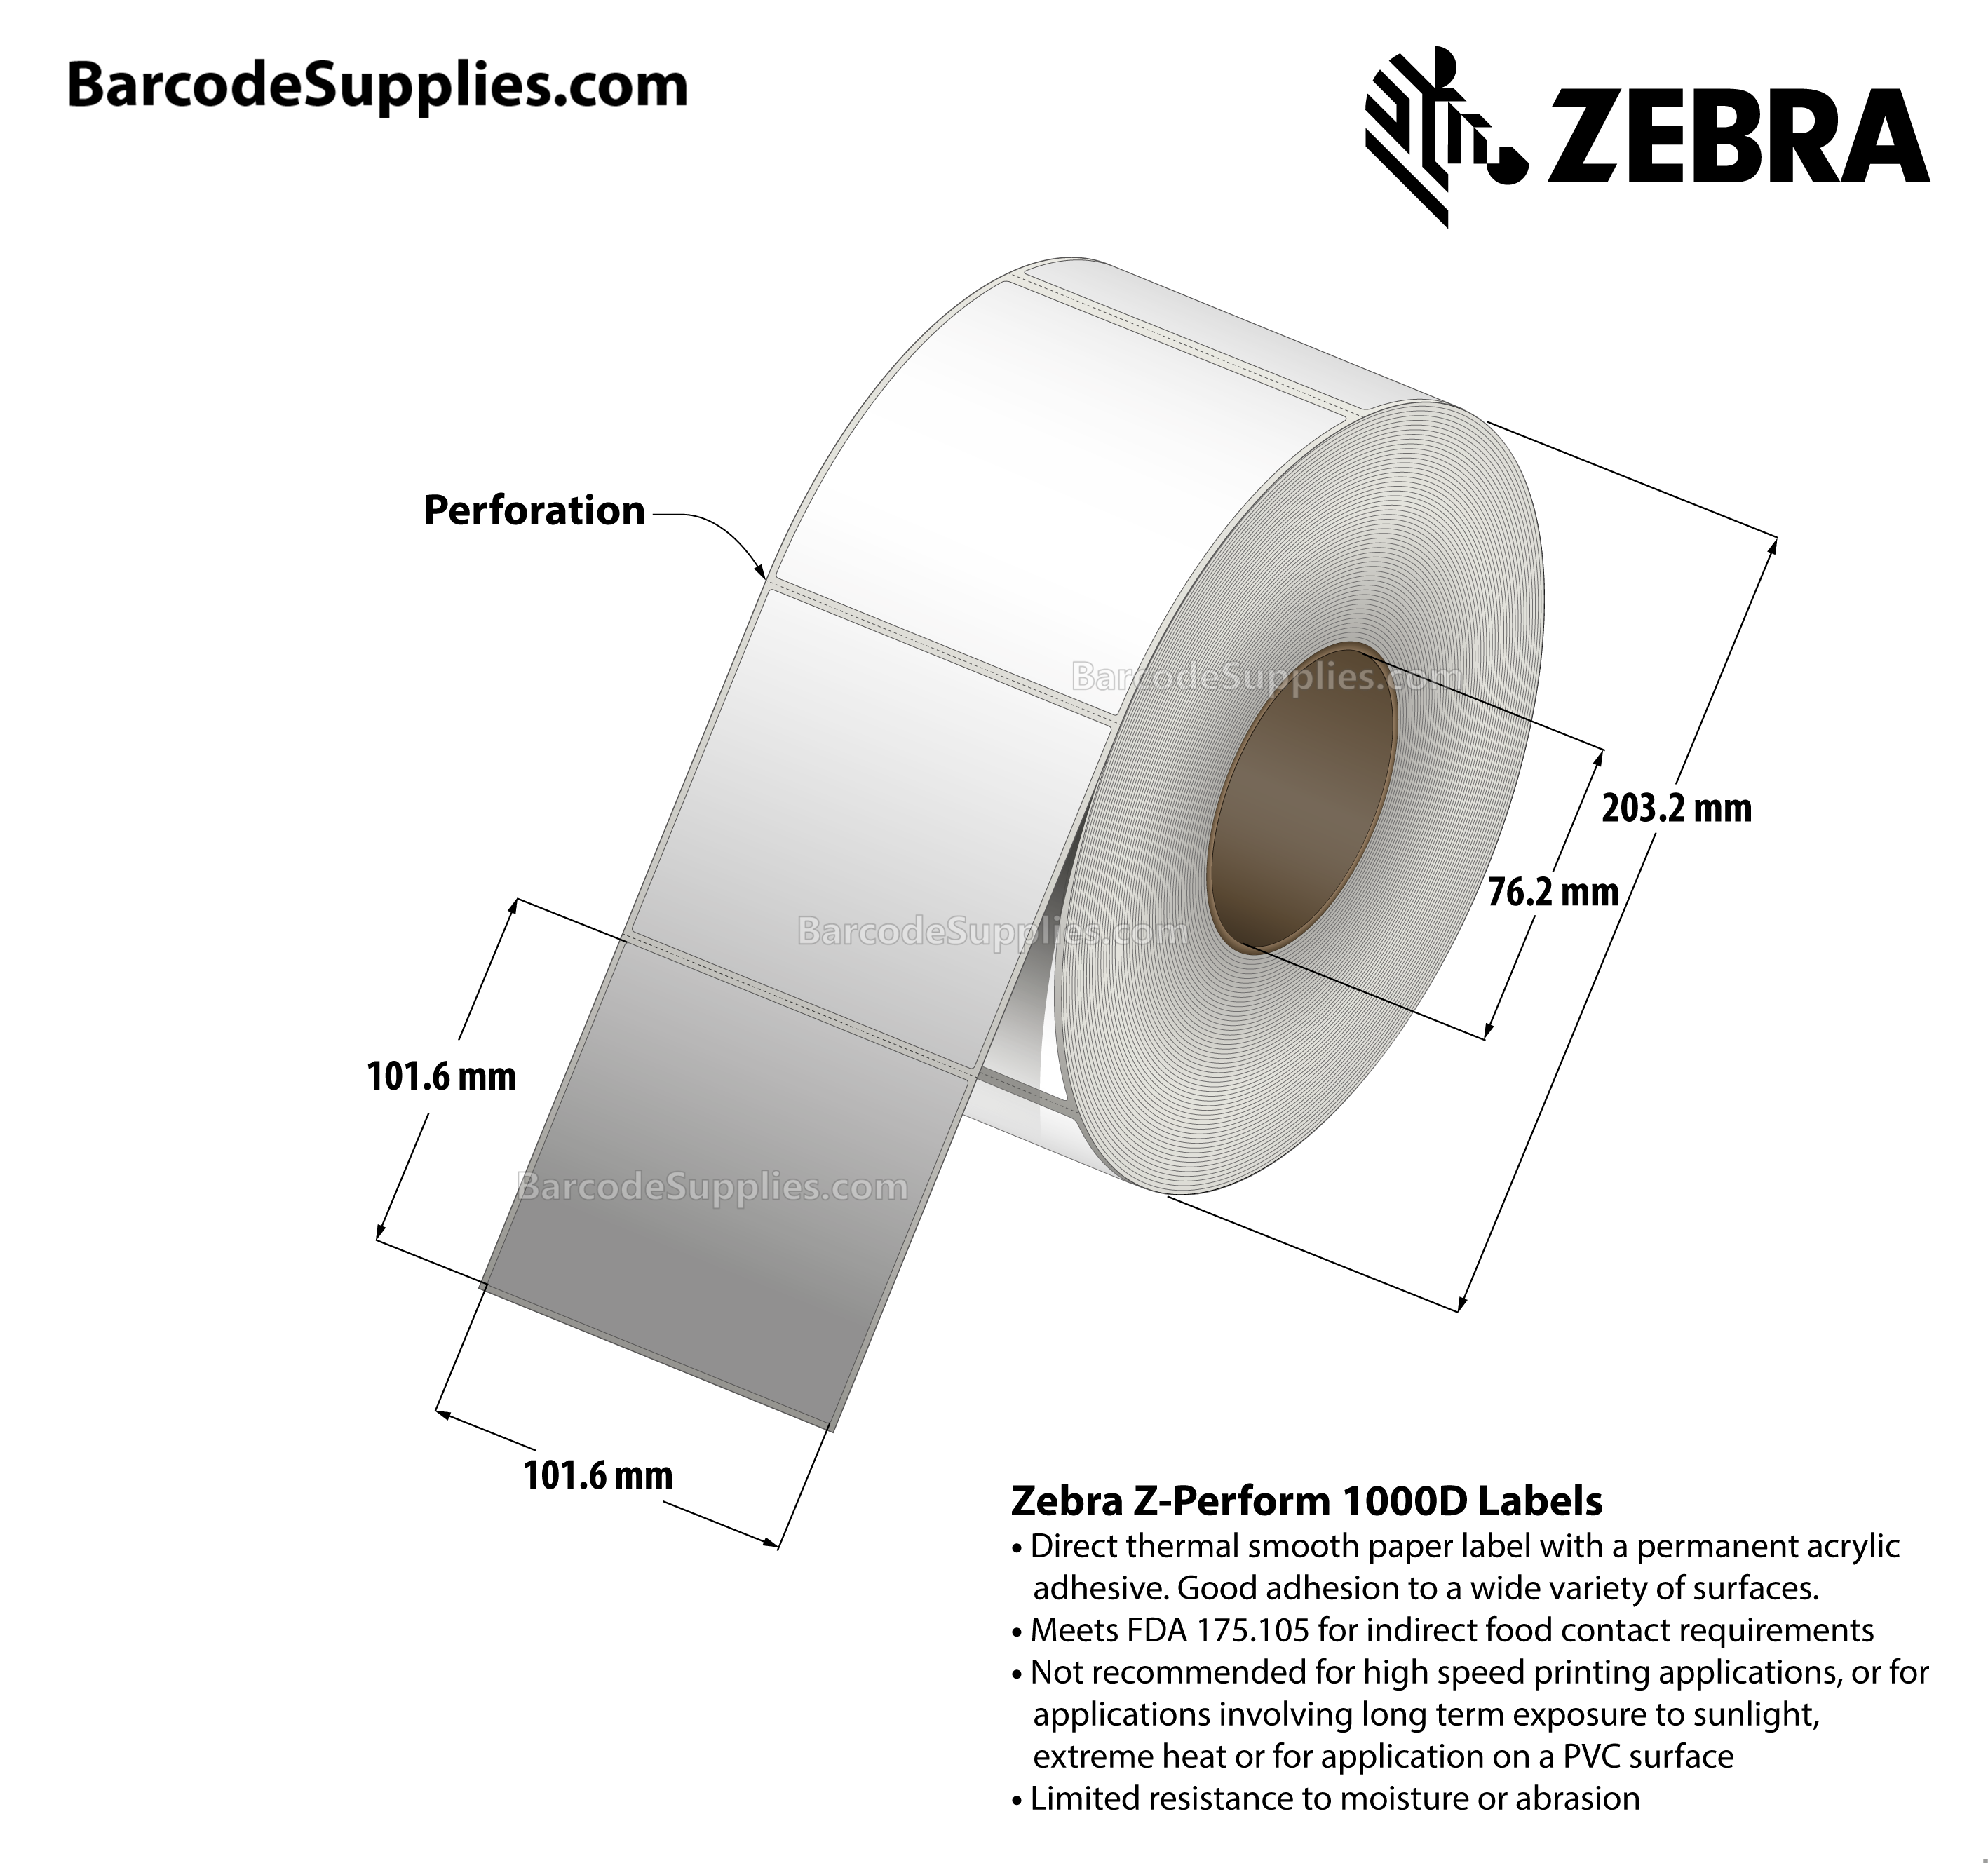 4 x 4 Direct Thermal White Z-Perform 1000D Labels With Permanent Adhesive - Perforated - 1425 Labels Per Roll - Carton Of 4 Rolls - 5700 Labels Total - MPN: 10028311